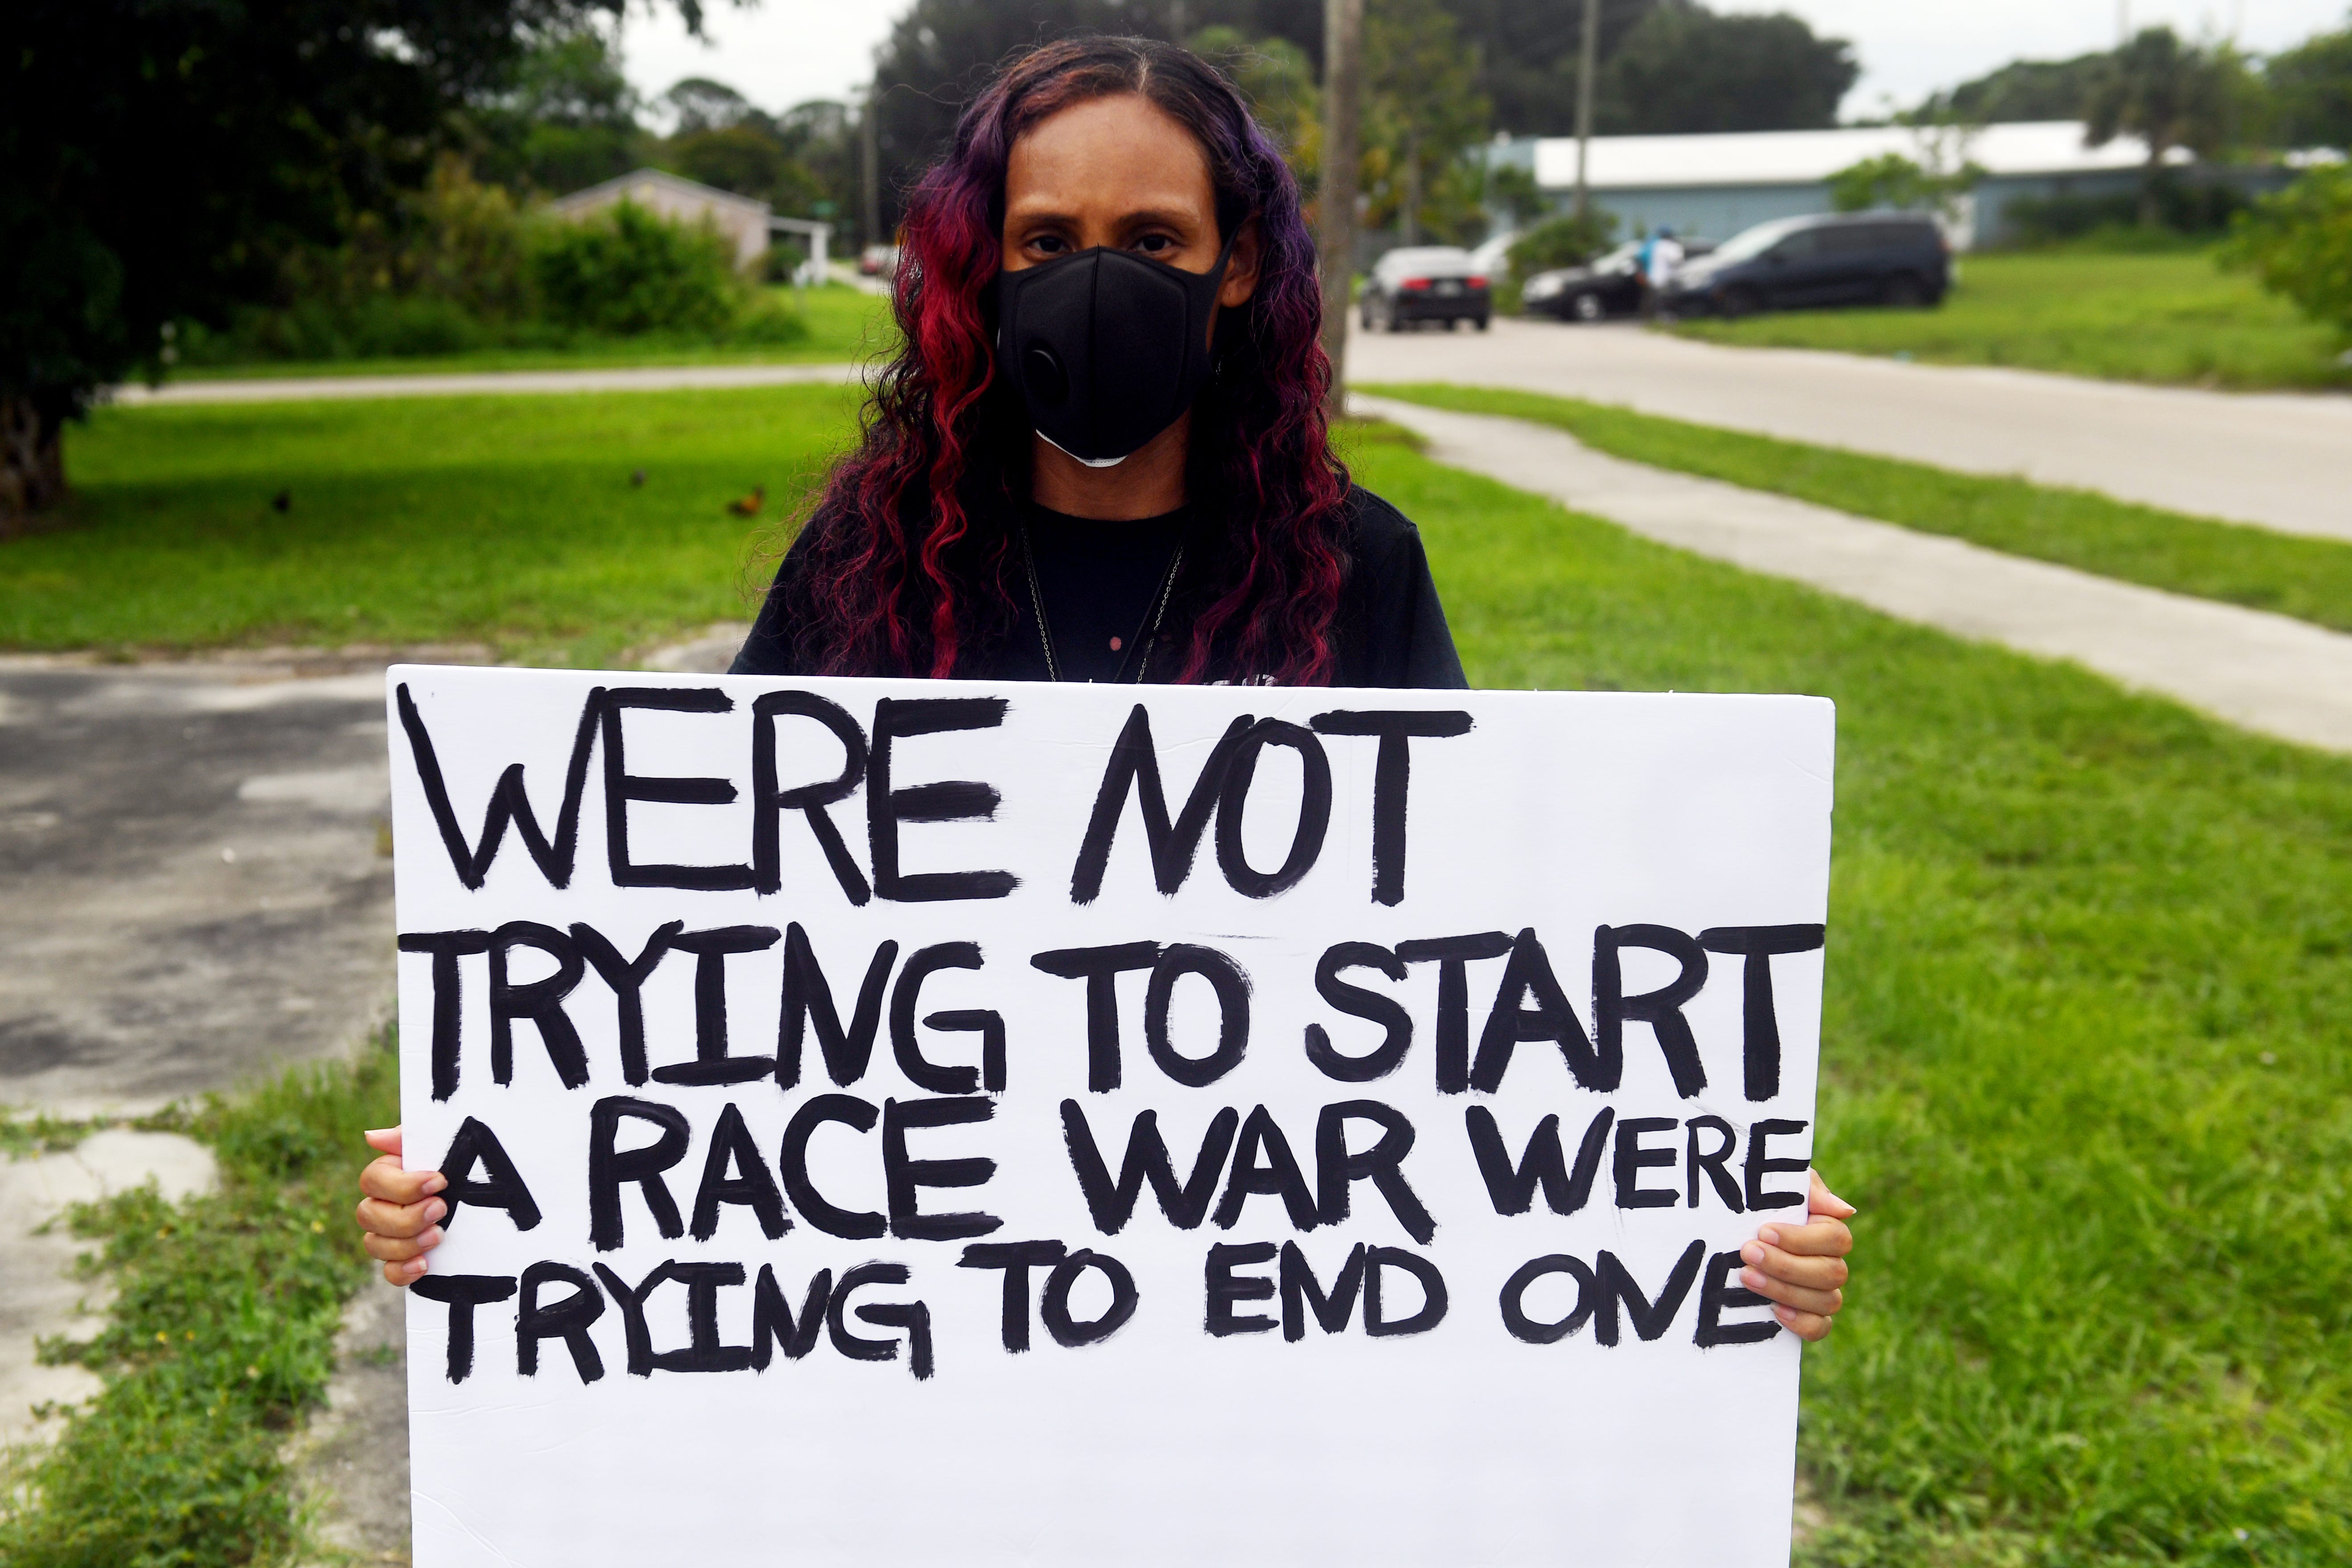 "For far too long the black community has suffered injustice at the hands of law enforcement," said Lasha Slappey, 34, of Indiantown, during a Black Lives Matters march Sunday, June 7, 2020, in Booker Park. "I'm marching to say enough is enough and we will no longer tolerate these crimes against us."